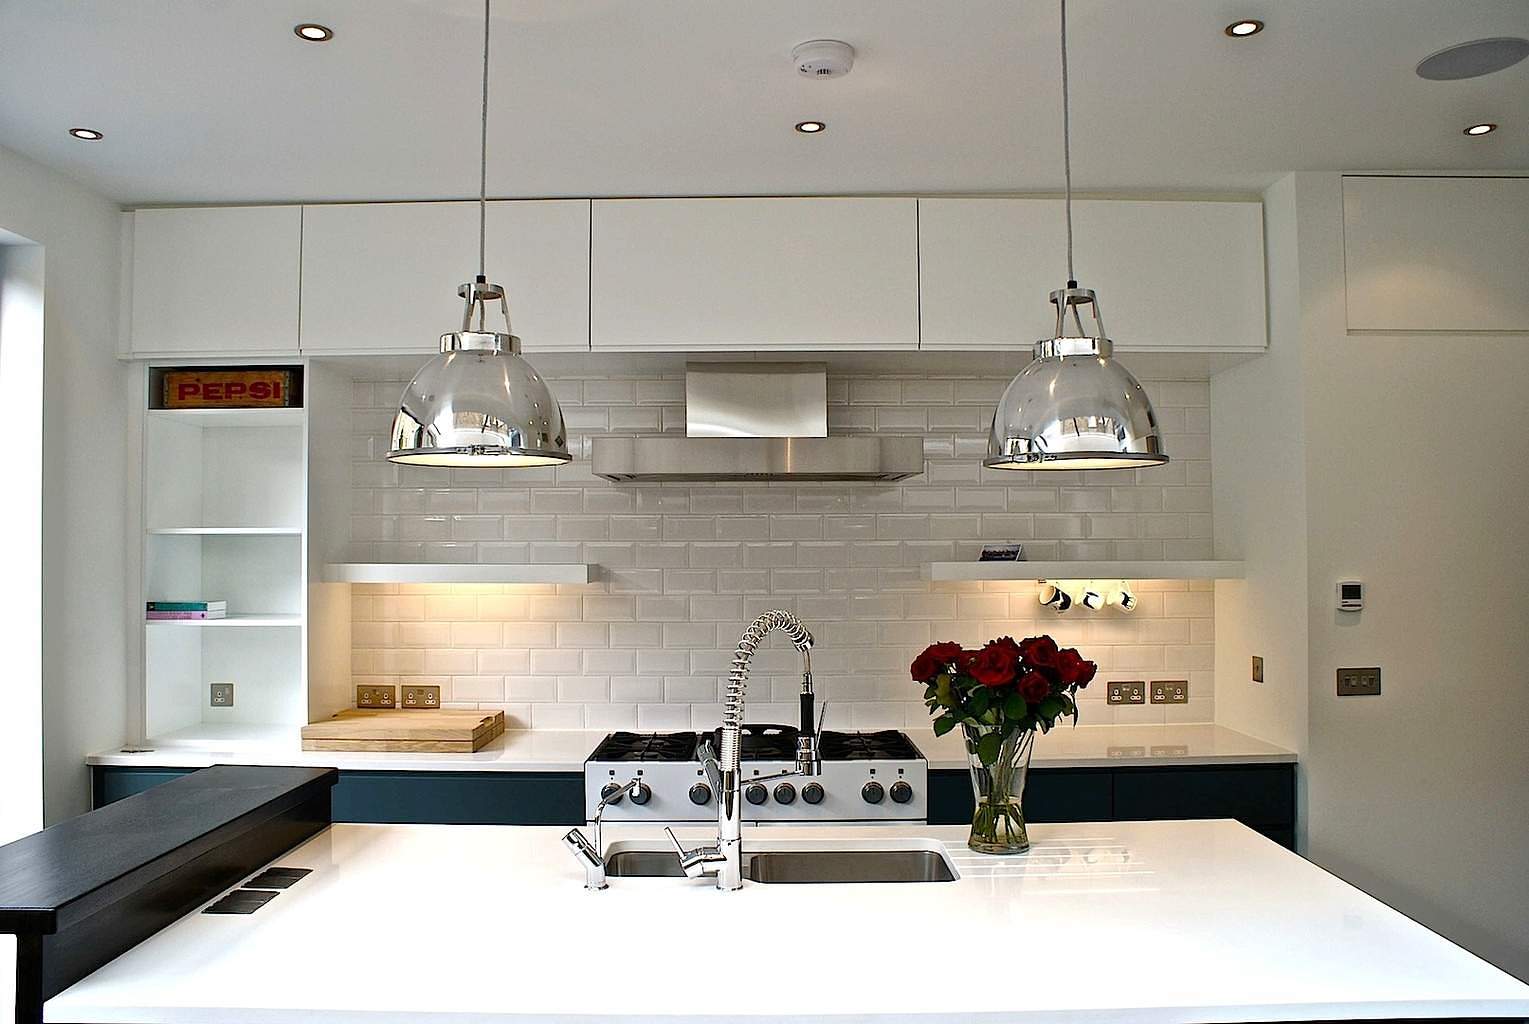 Kitchen design with pendant light and white walls